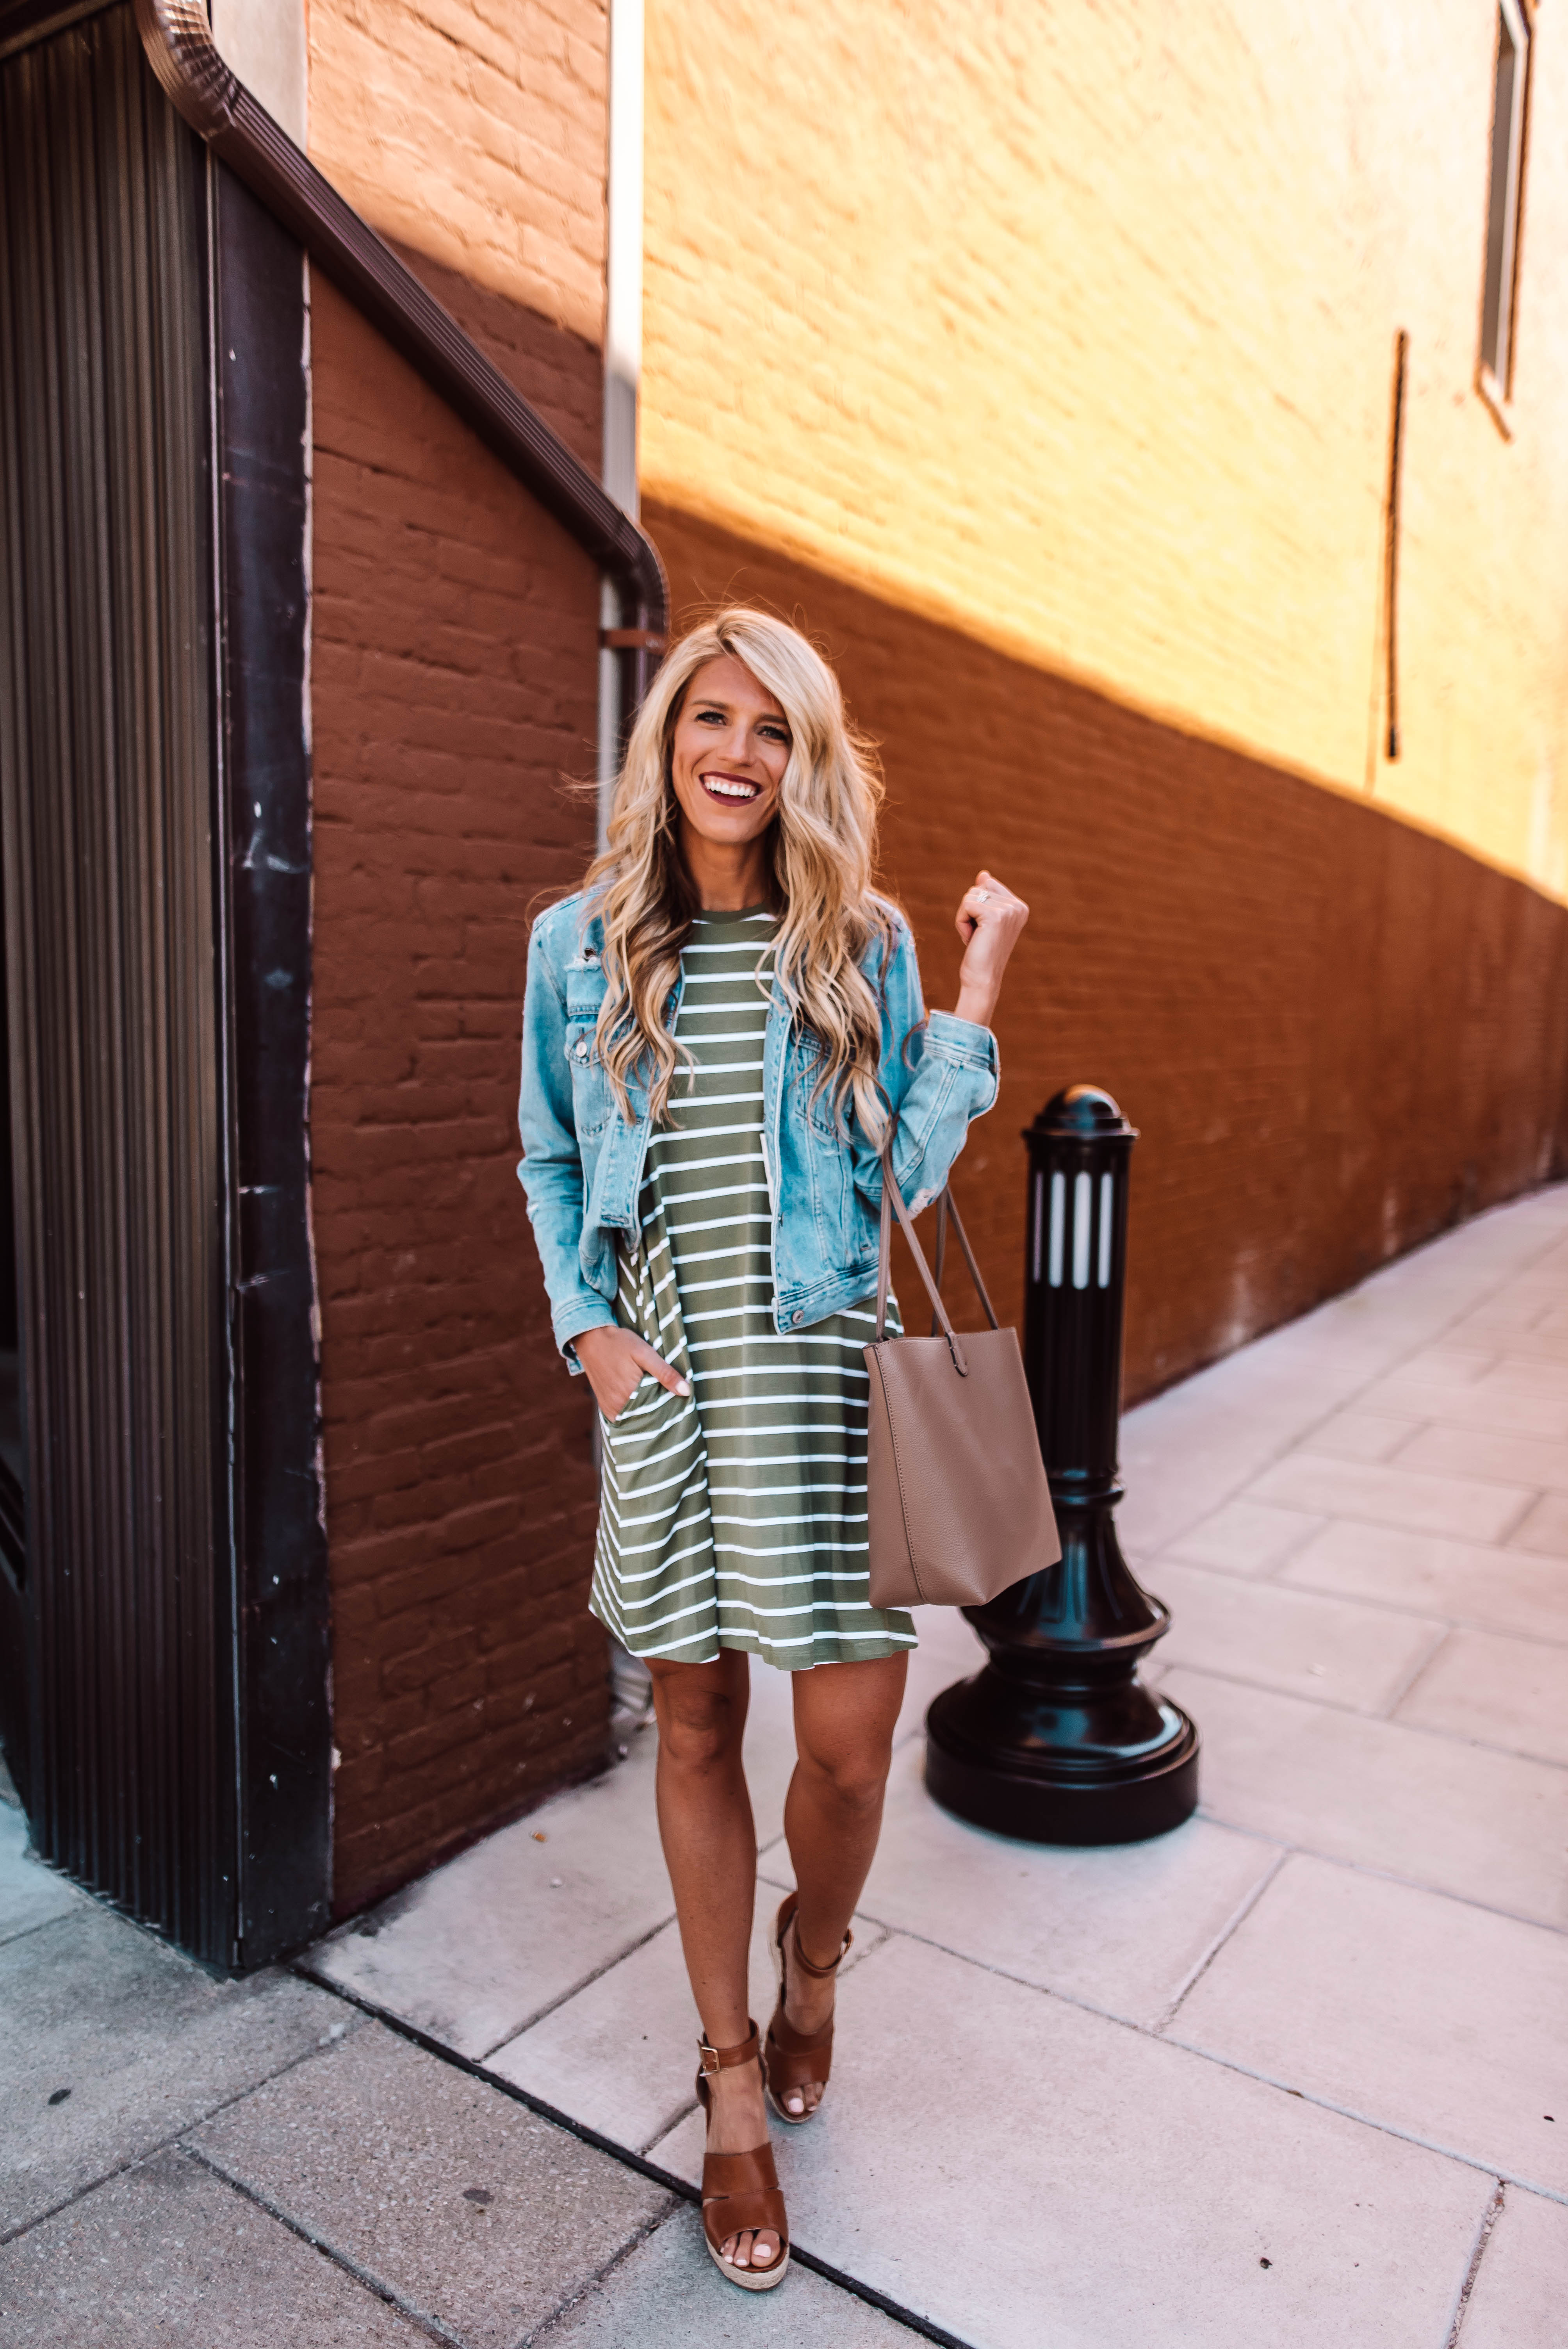 Tall Blonde Bell - Fashion + Lifestyle by Ashley Bell @tallblondebell.com